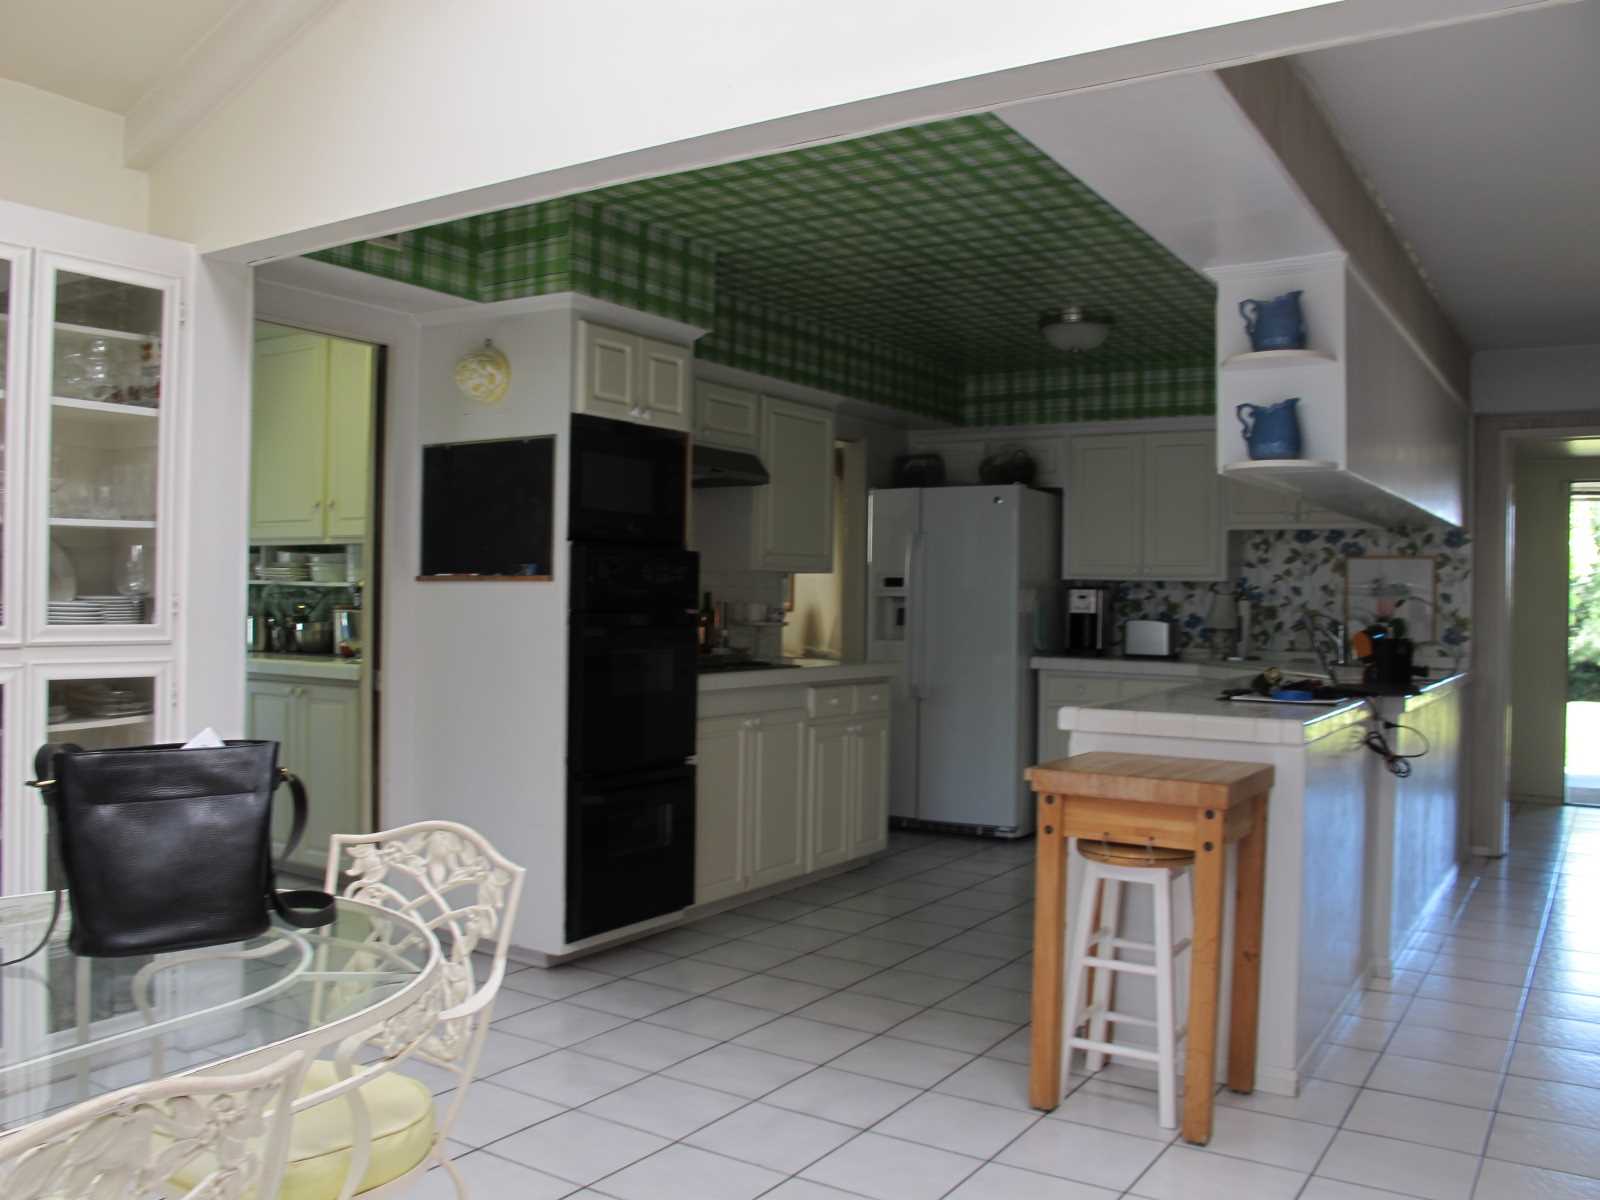 Before - The original kitchen had a tiled floor and countertops, with white cabinets, mismatched appliances, a green tartan wallpapered ceiling, and a floral wallpaper backsplash.